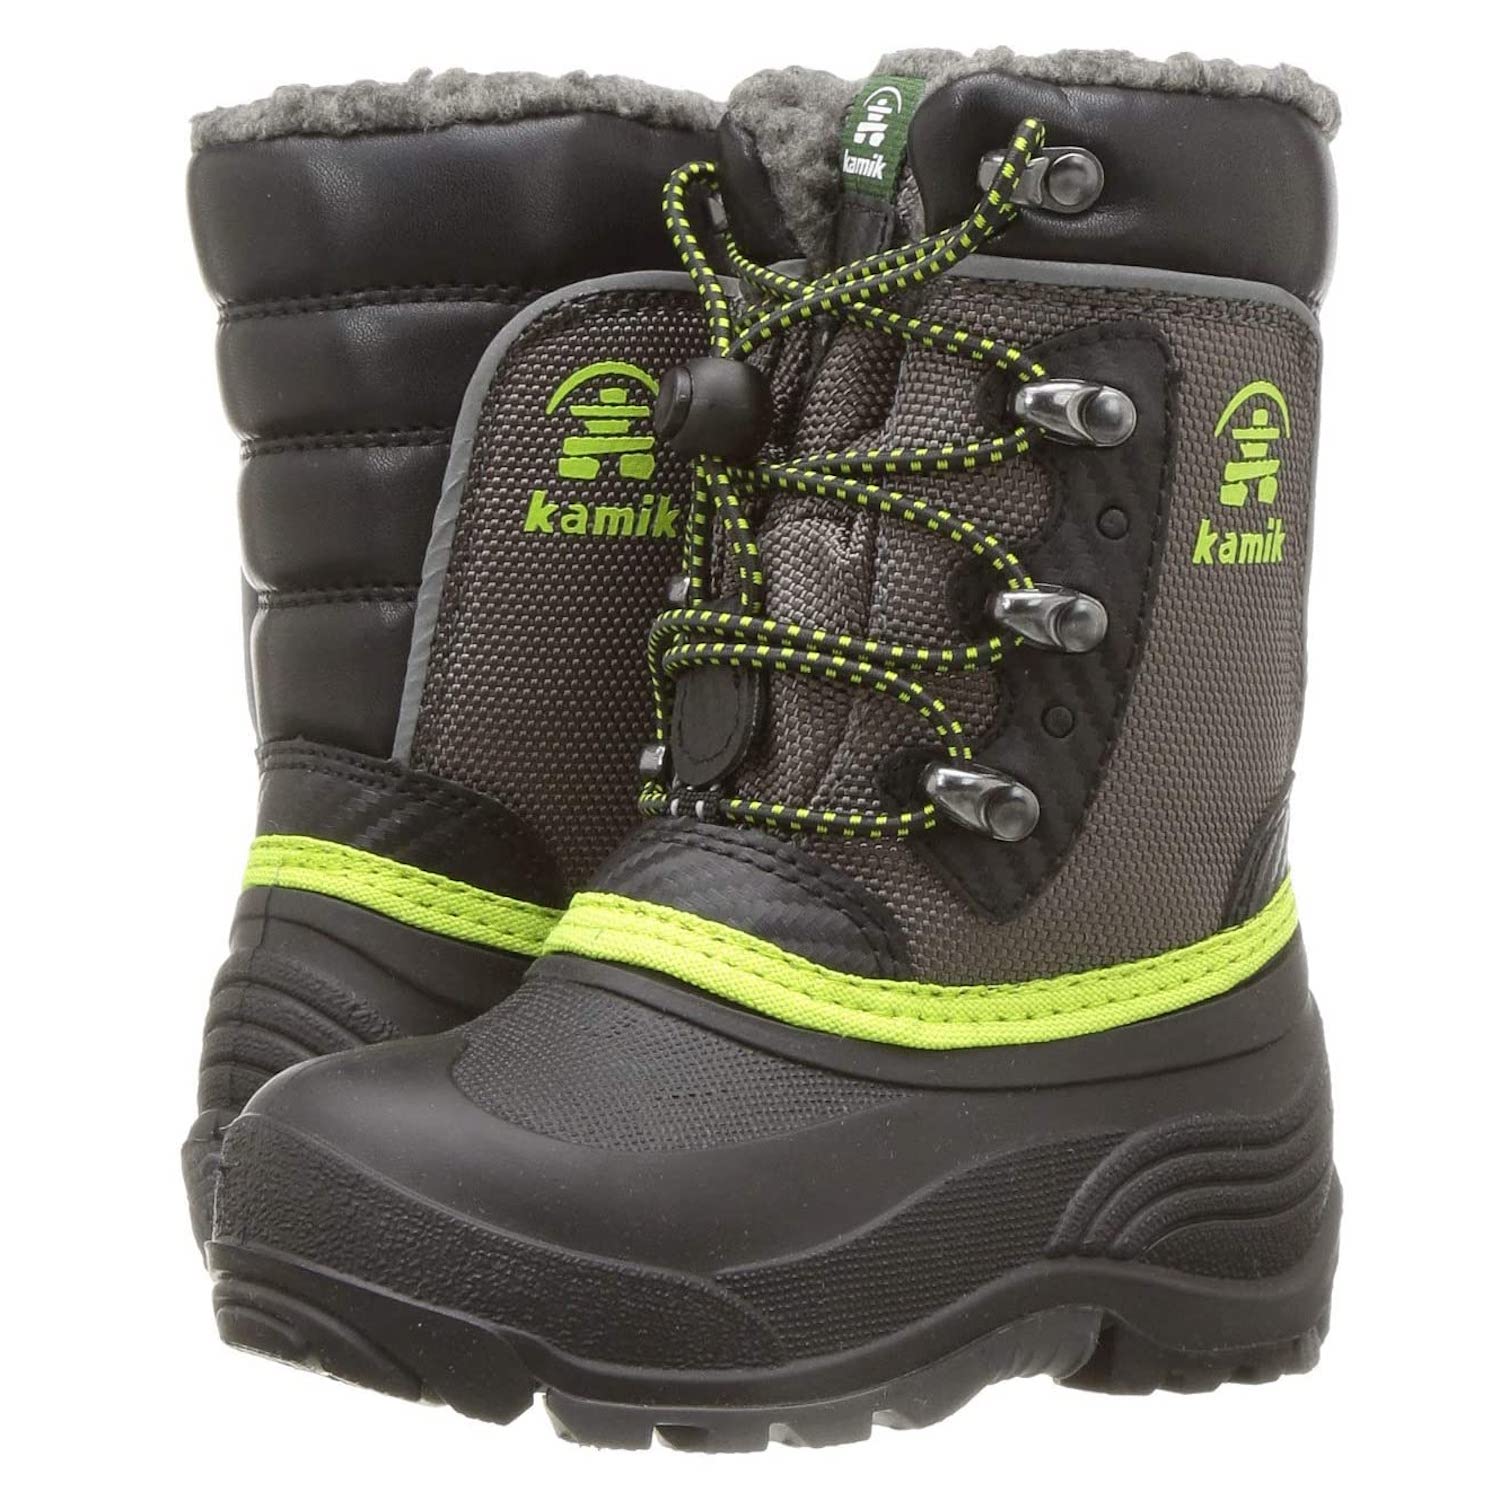 Kamik Kids Luke Boots for Toddlers, Little Kids, and Big Kids